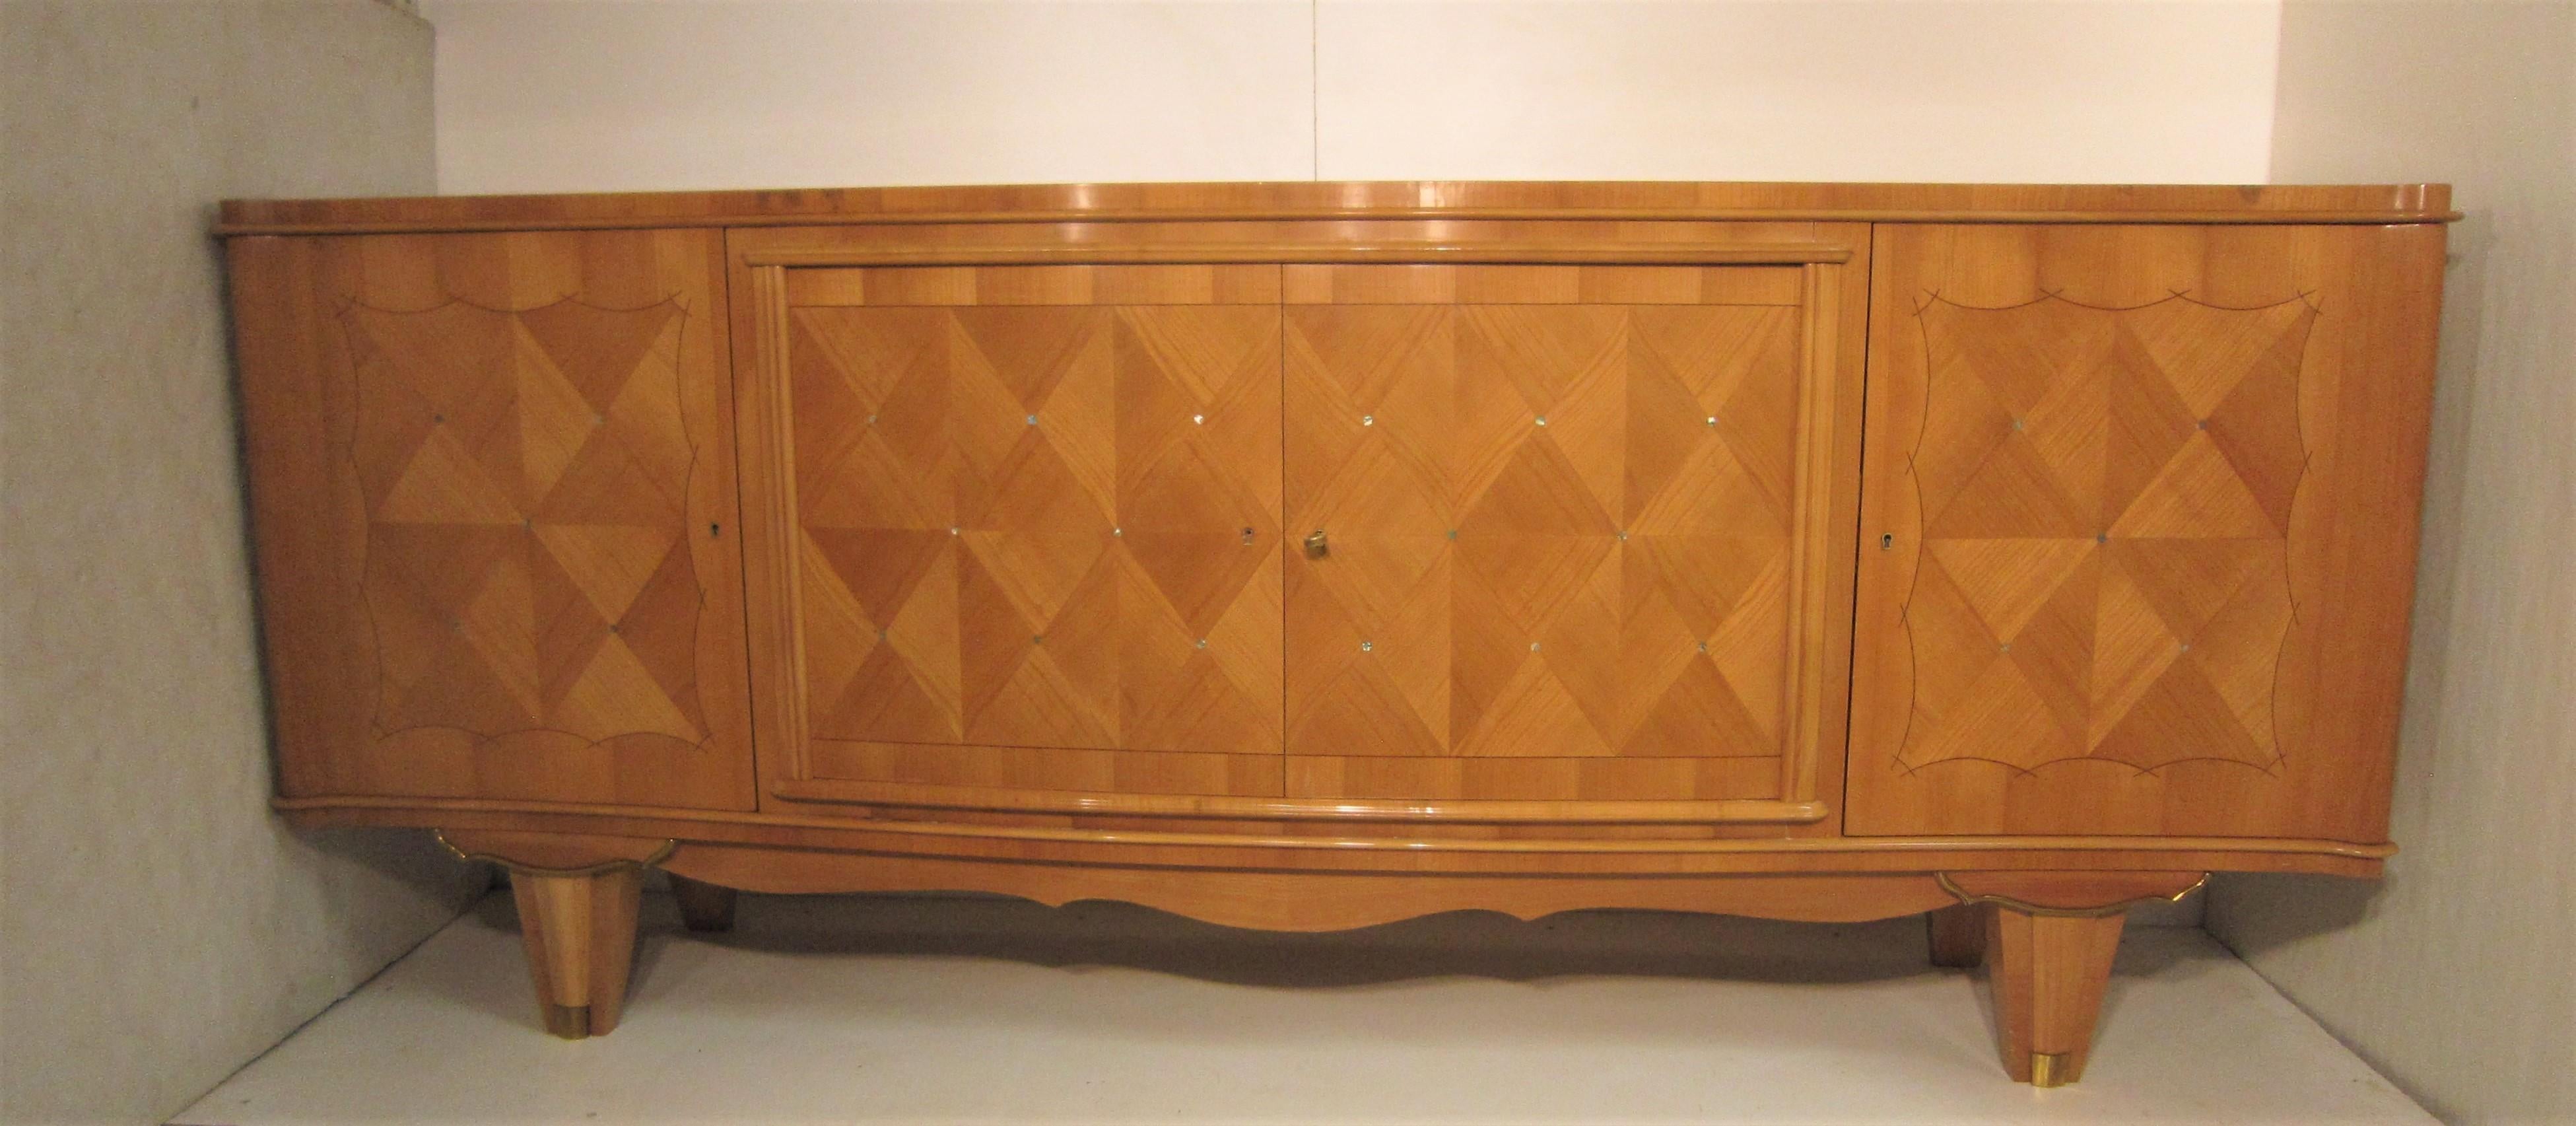 1940s Sycamore Credenza in Parquetry Inlay, Attributed to Andre Arbus 12